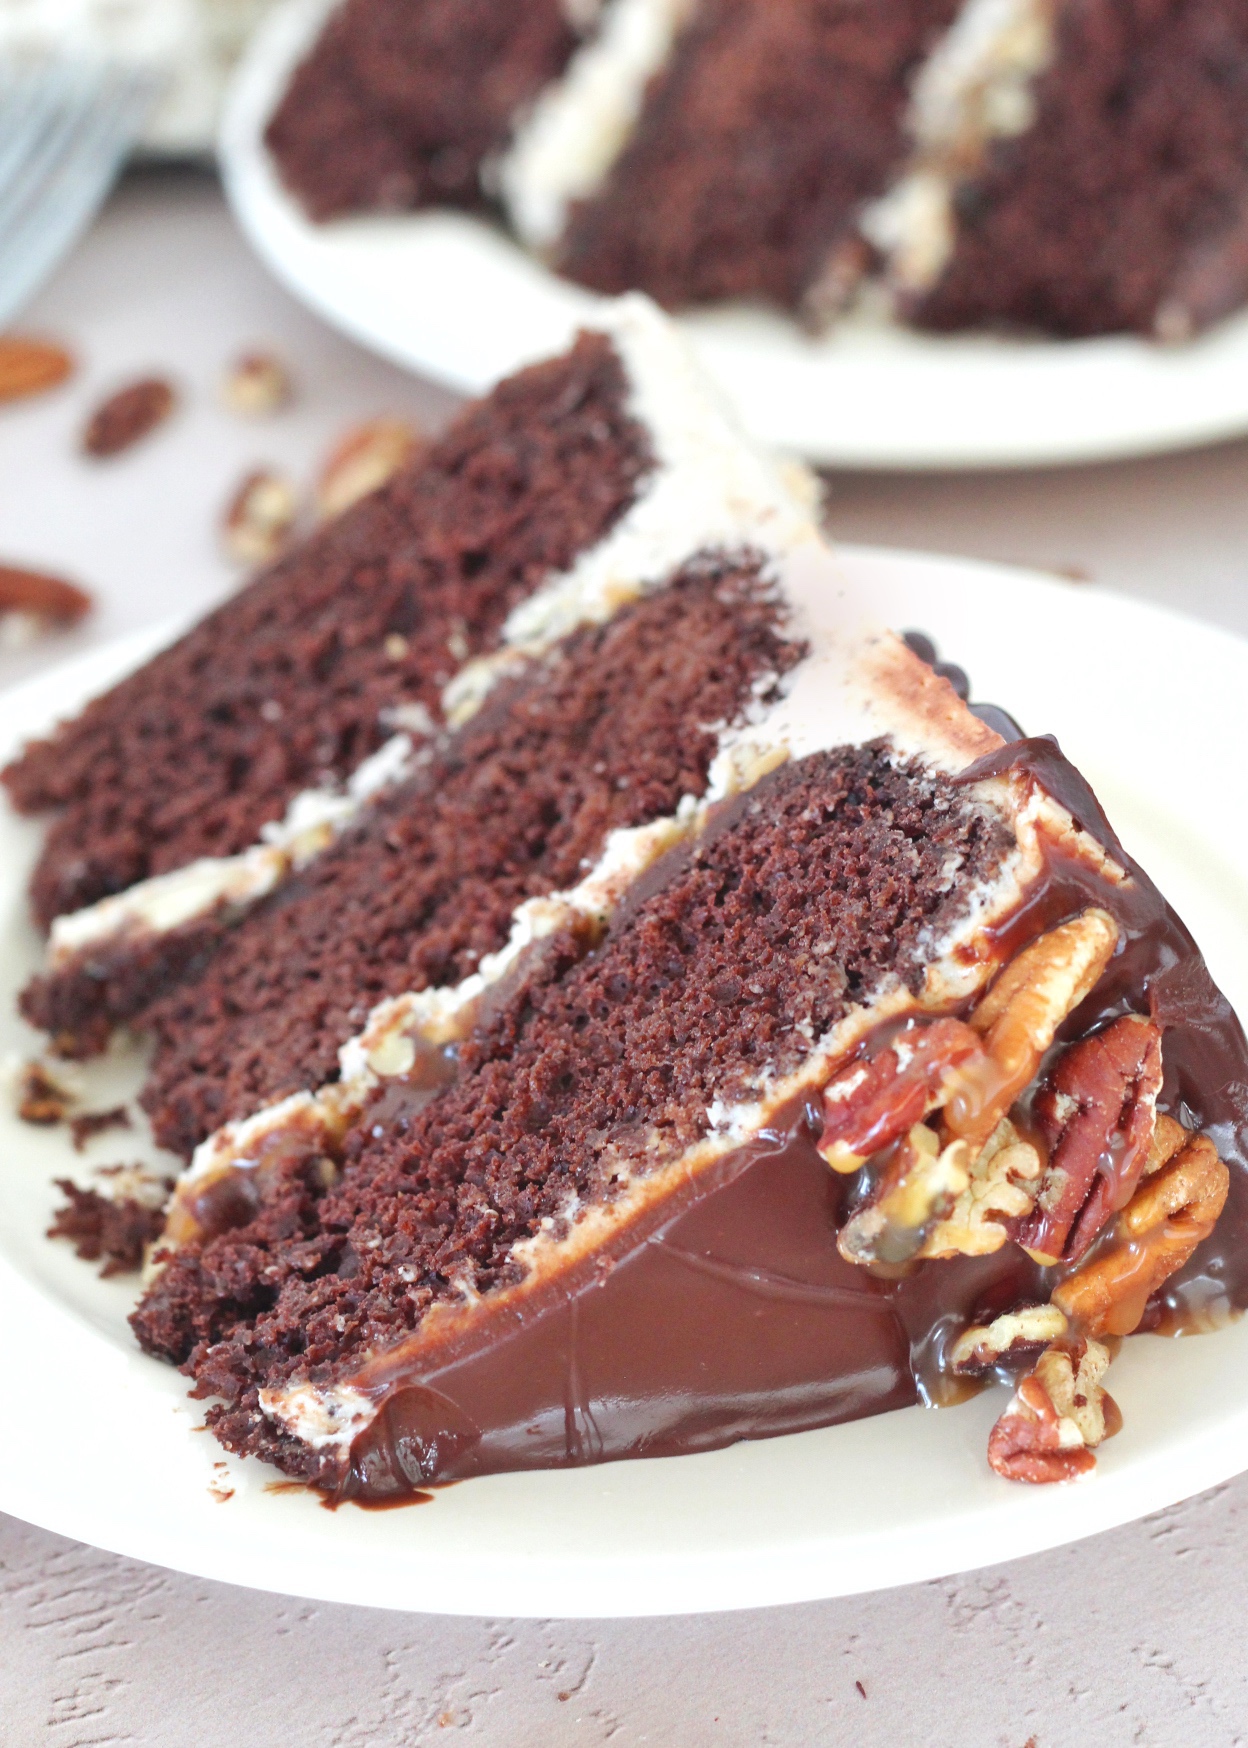 Turtle Pie Cake - rich and tender chocolate cake layers with salted caramel, toasted pecans, chocolate ganache and pecan buttercream #cakebycourtney #pecan #turtlepie #turtlepiecake #turtlepiecakerecipe #turtlepierecipe #chocolatecake #thebestturtlepiecake #thebestturtlepie